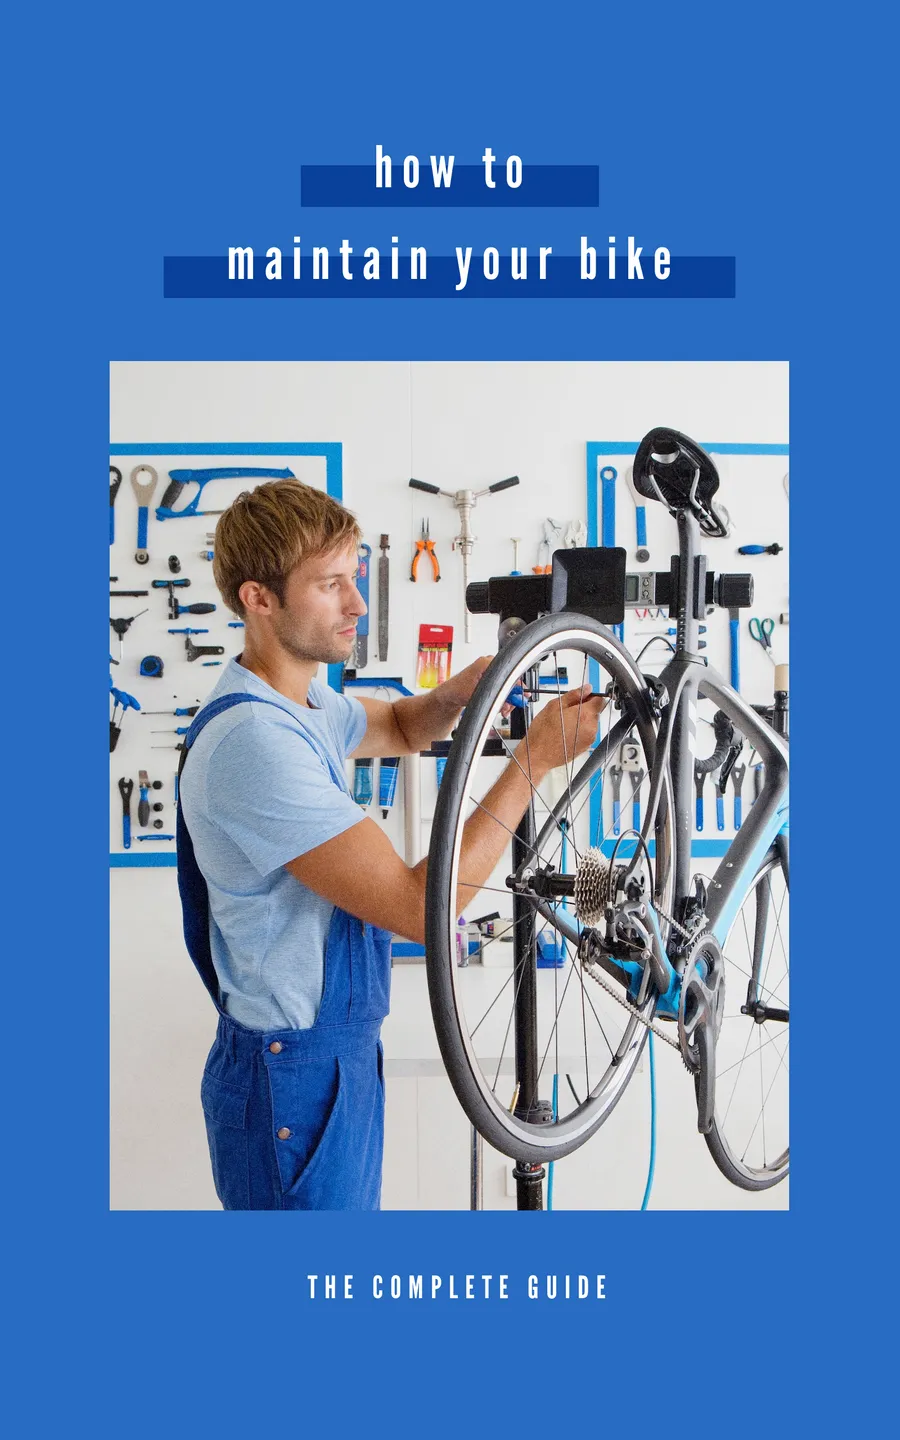 How to Maintain Your Bike book-covers template